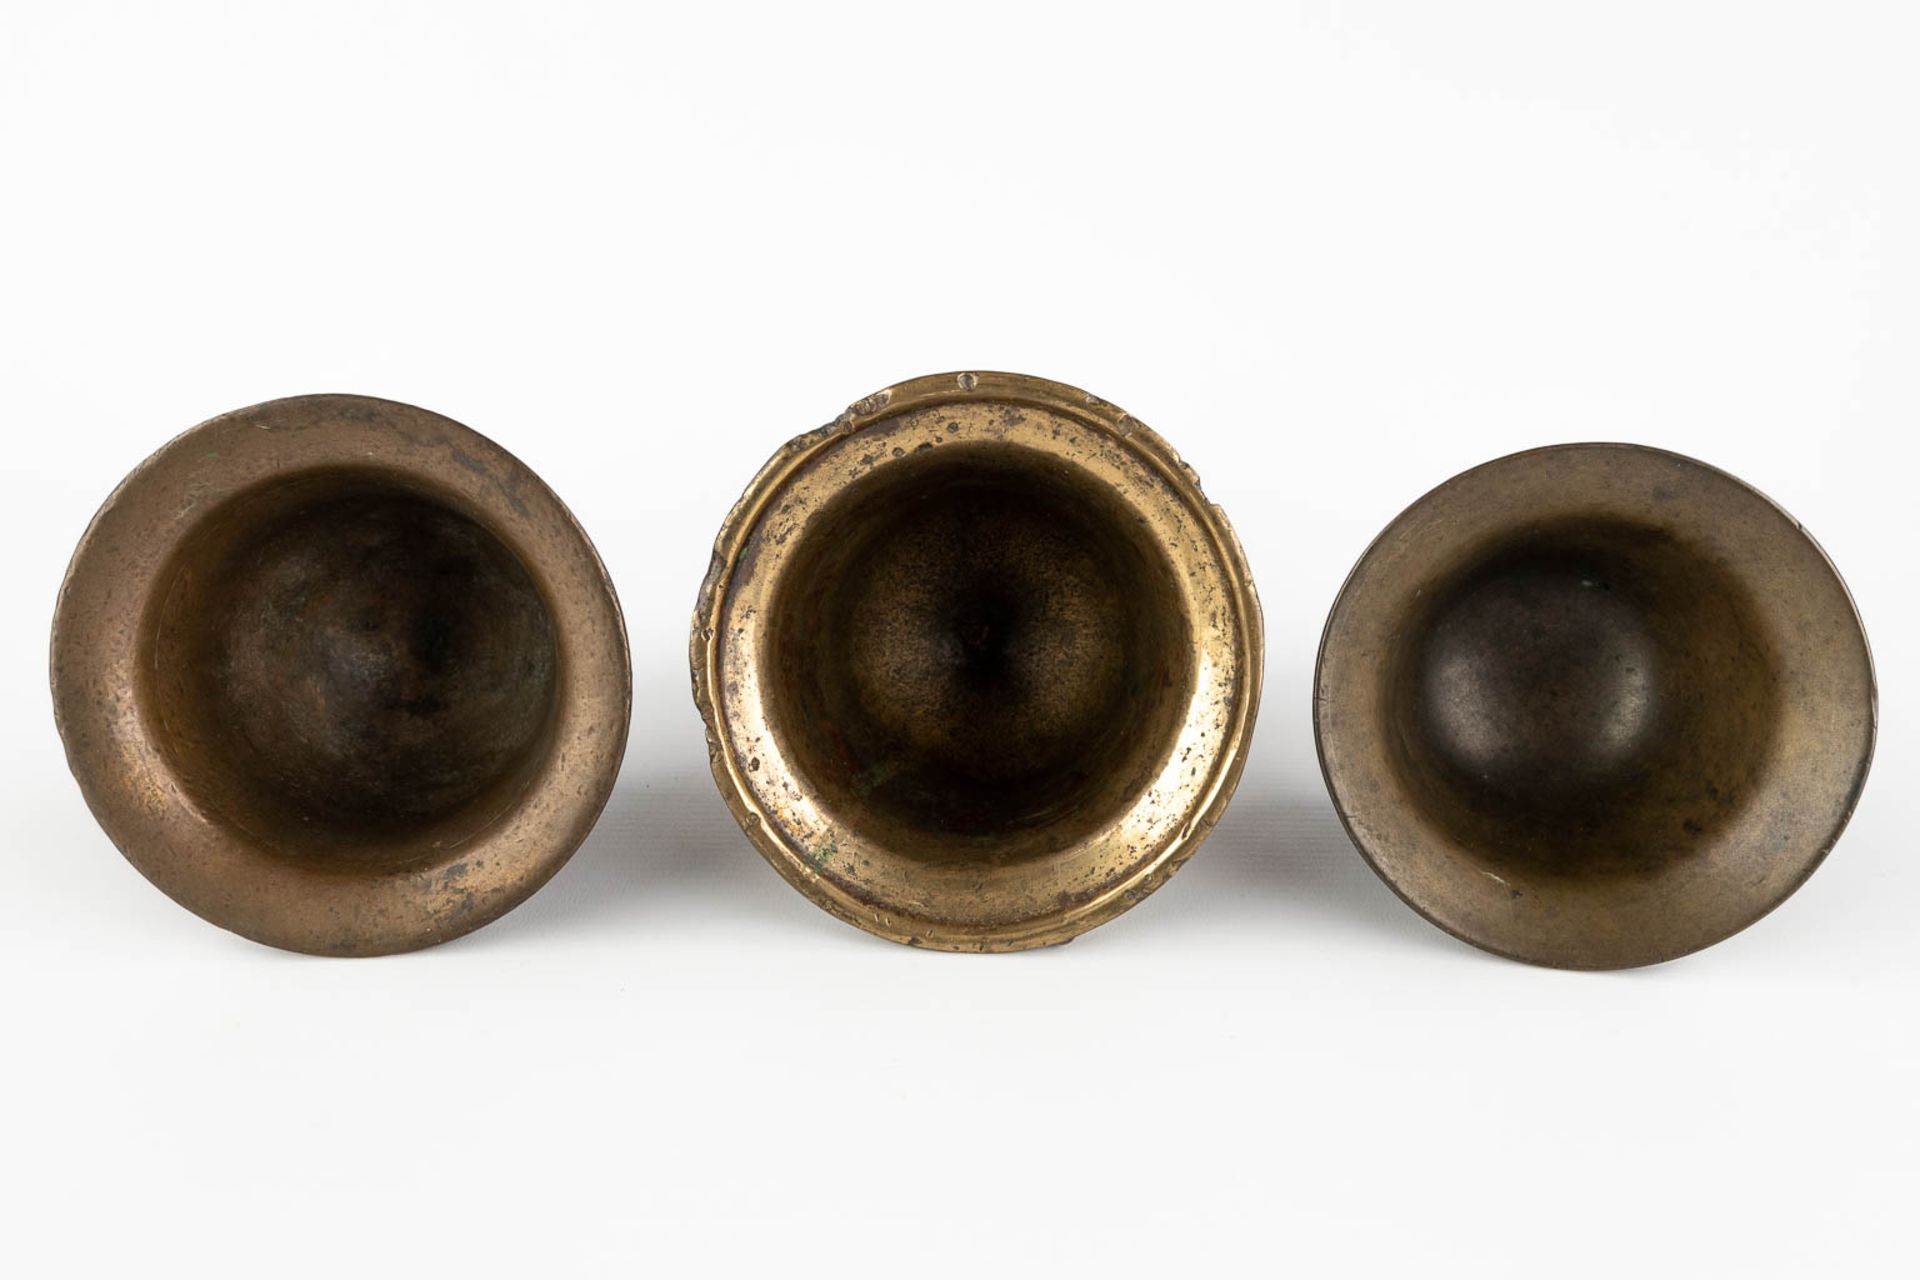 Three antique mortars with two pestles, bronze. Probably Spain, 17th/18th C. (H:9 x D:13 cm) - Image 7 of 12